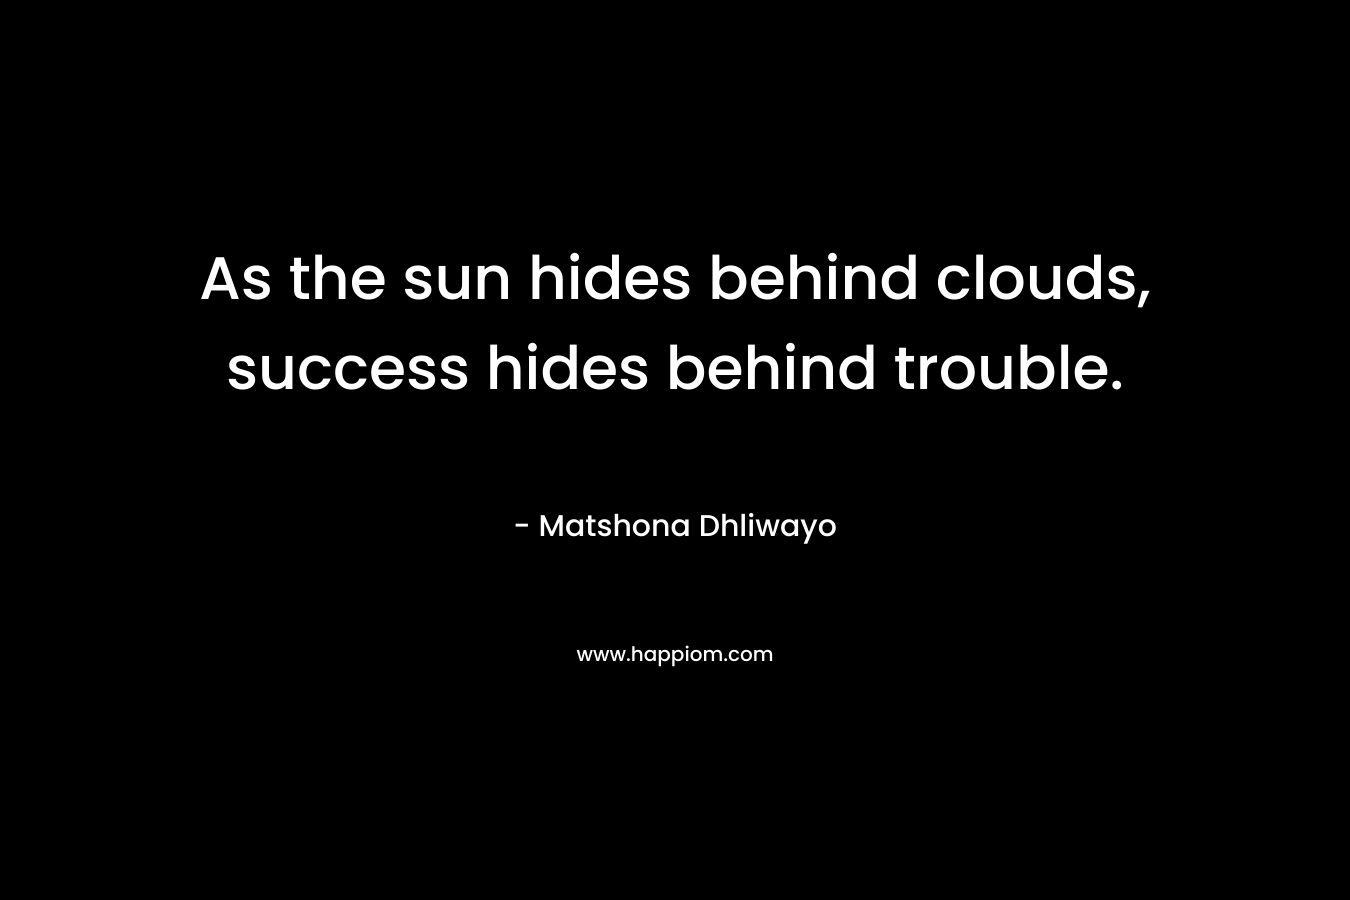 As the sun hides behind clouds, success hides behind trouble. – Matshona Dhliwayo